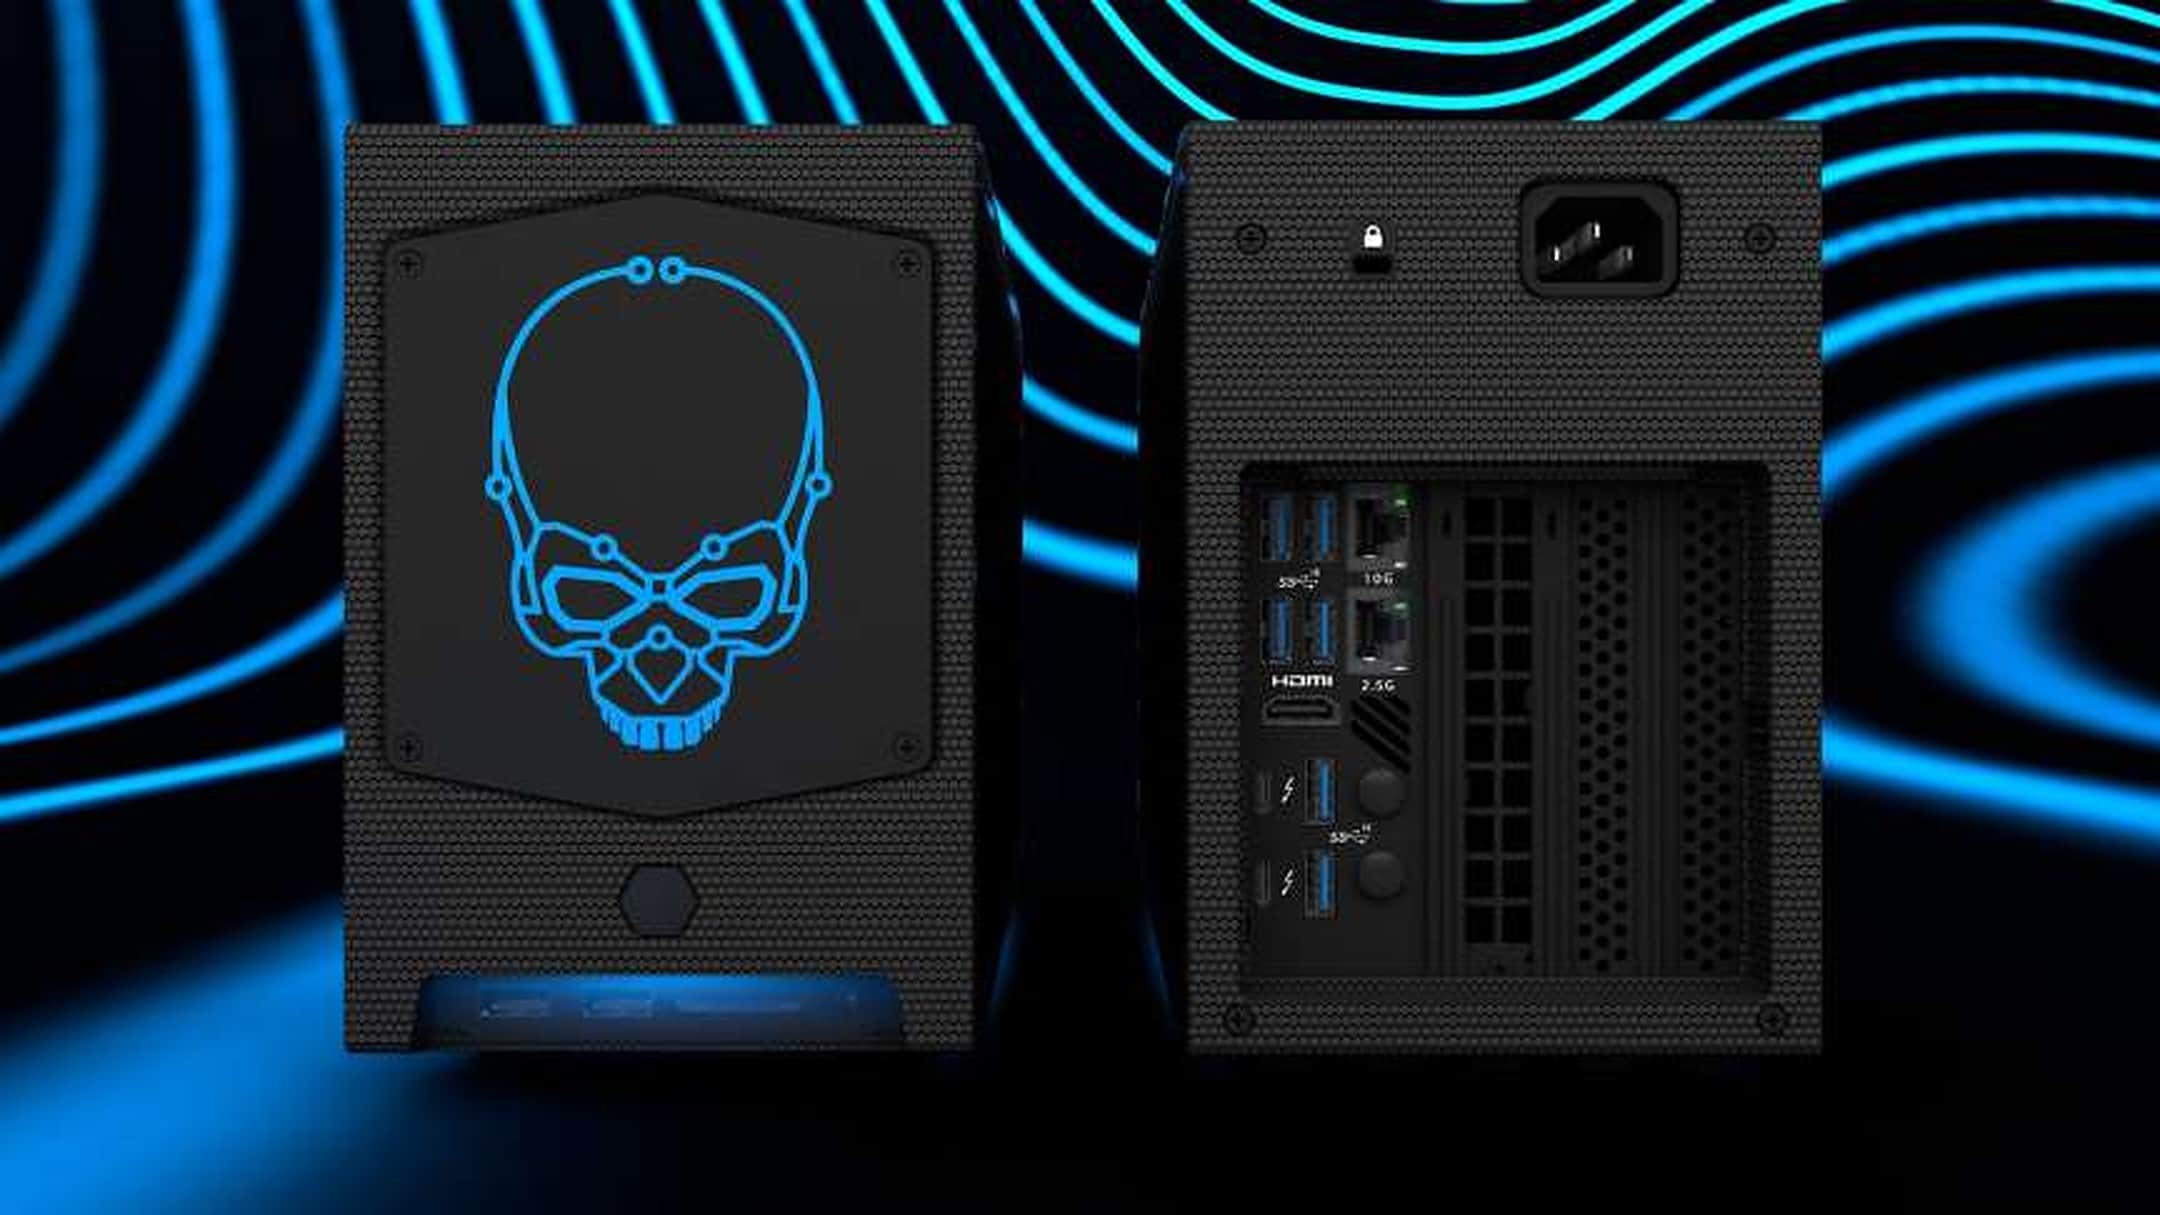 Intel Nuc 12 Extreme mini PC render front and back